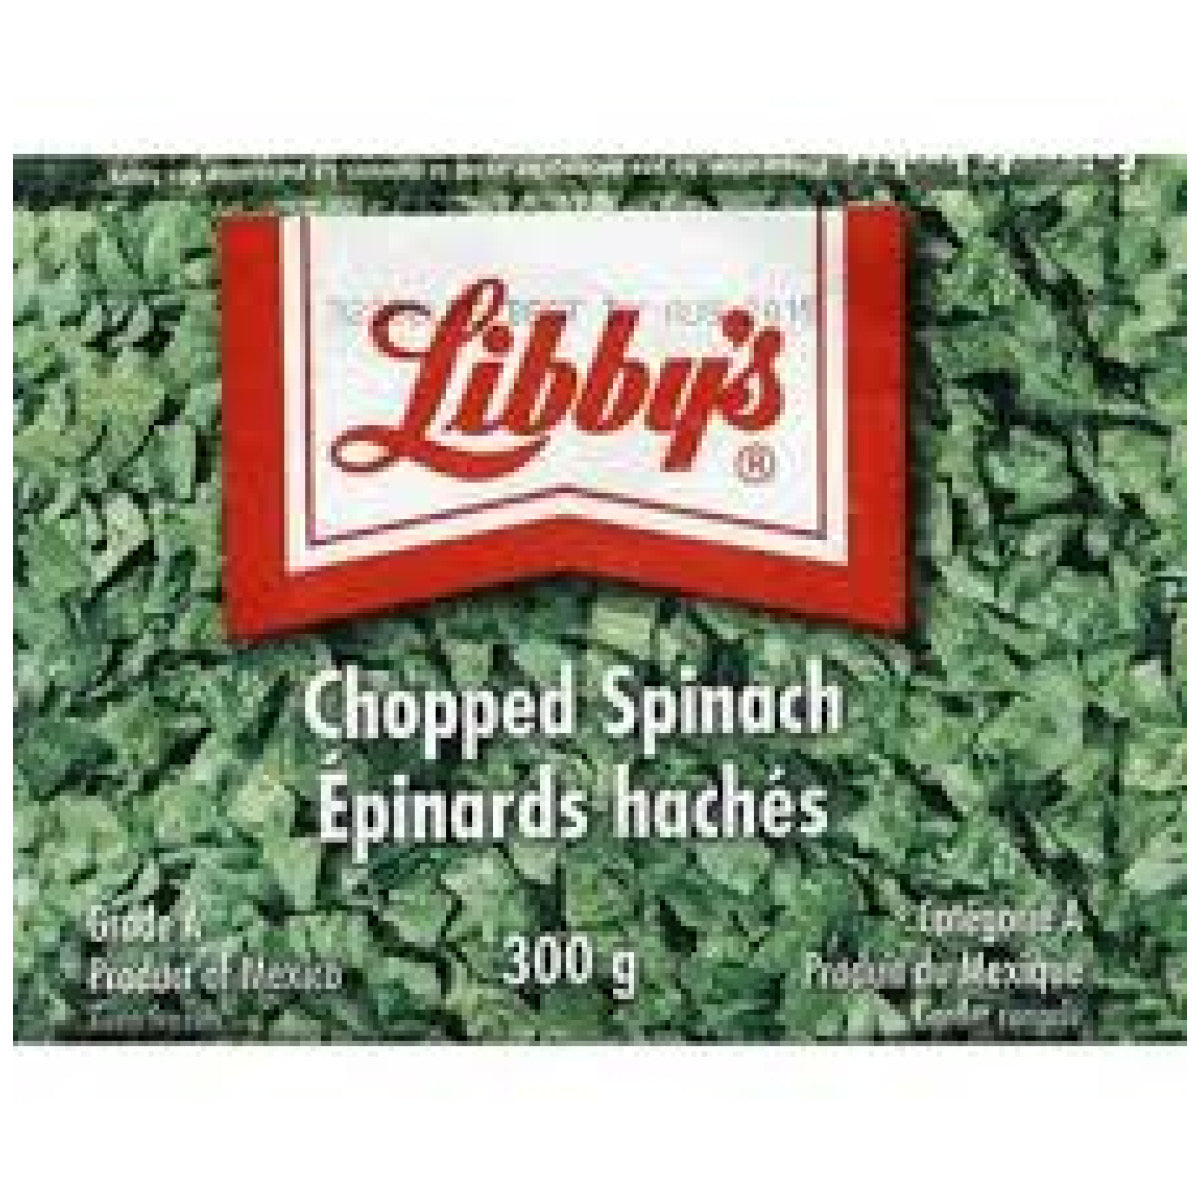 Libby's Chopped Spinach, Frozen, 300g